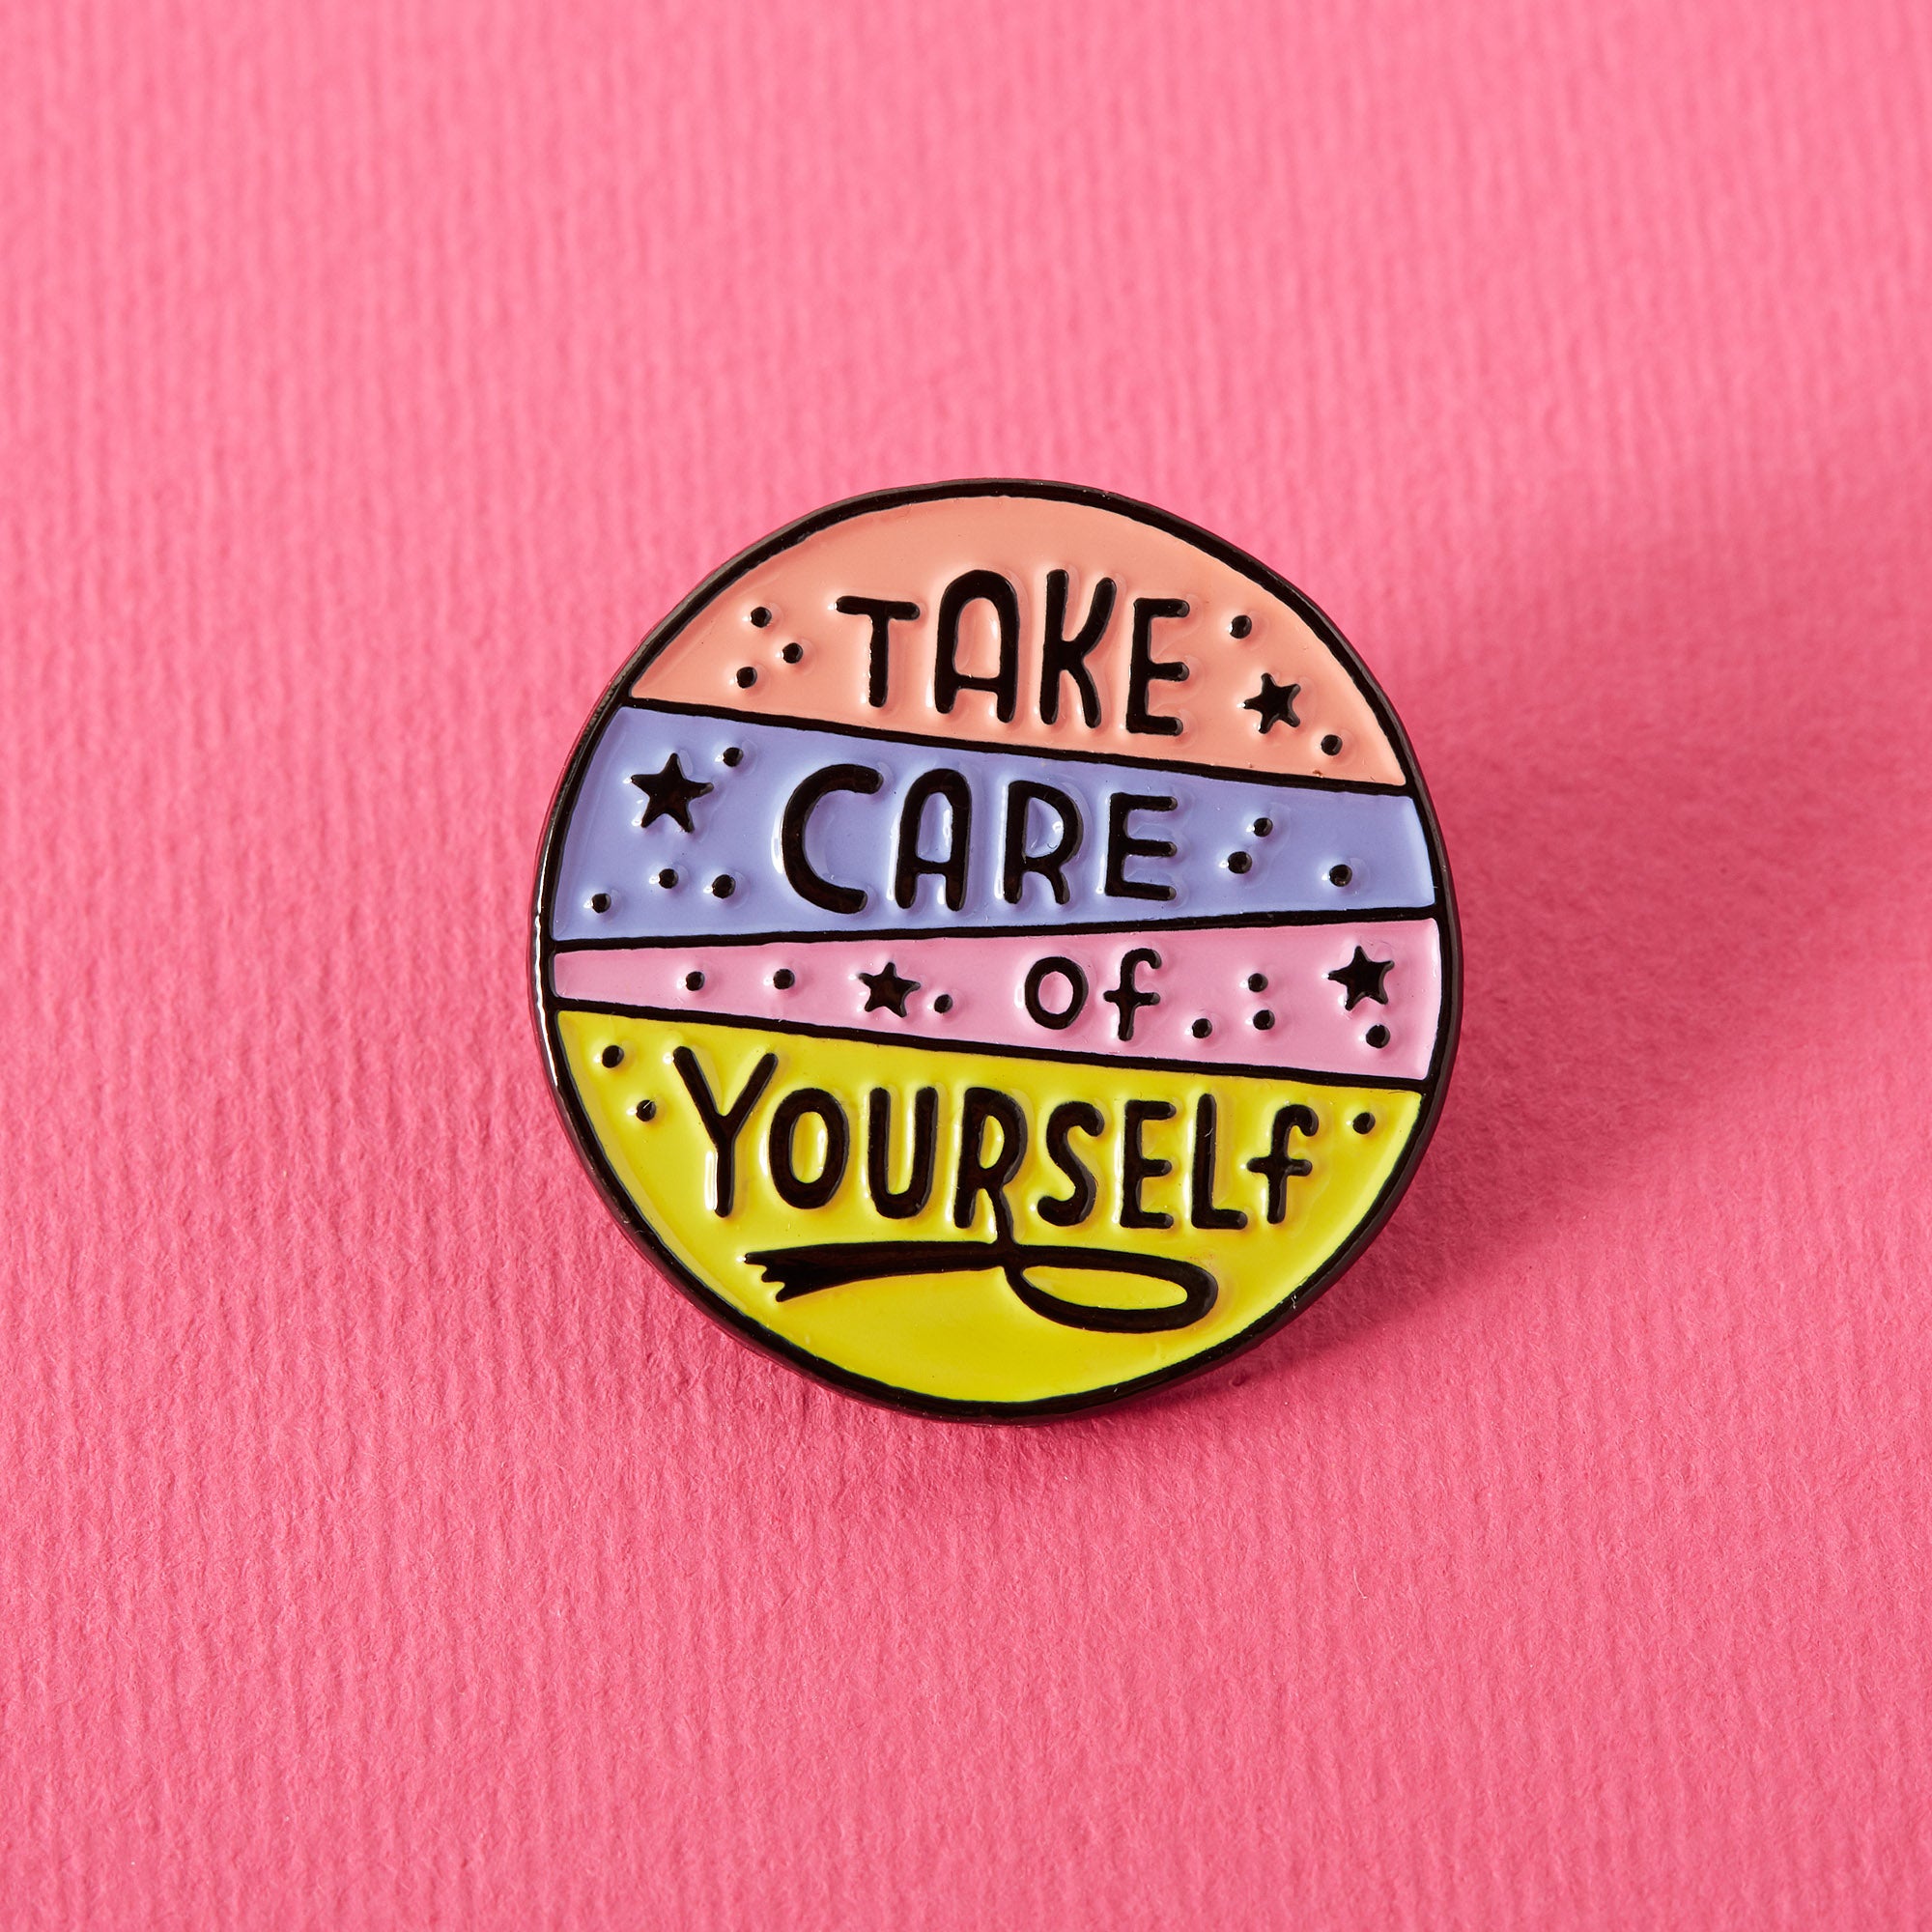 Pin on Badges